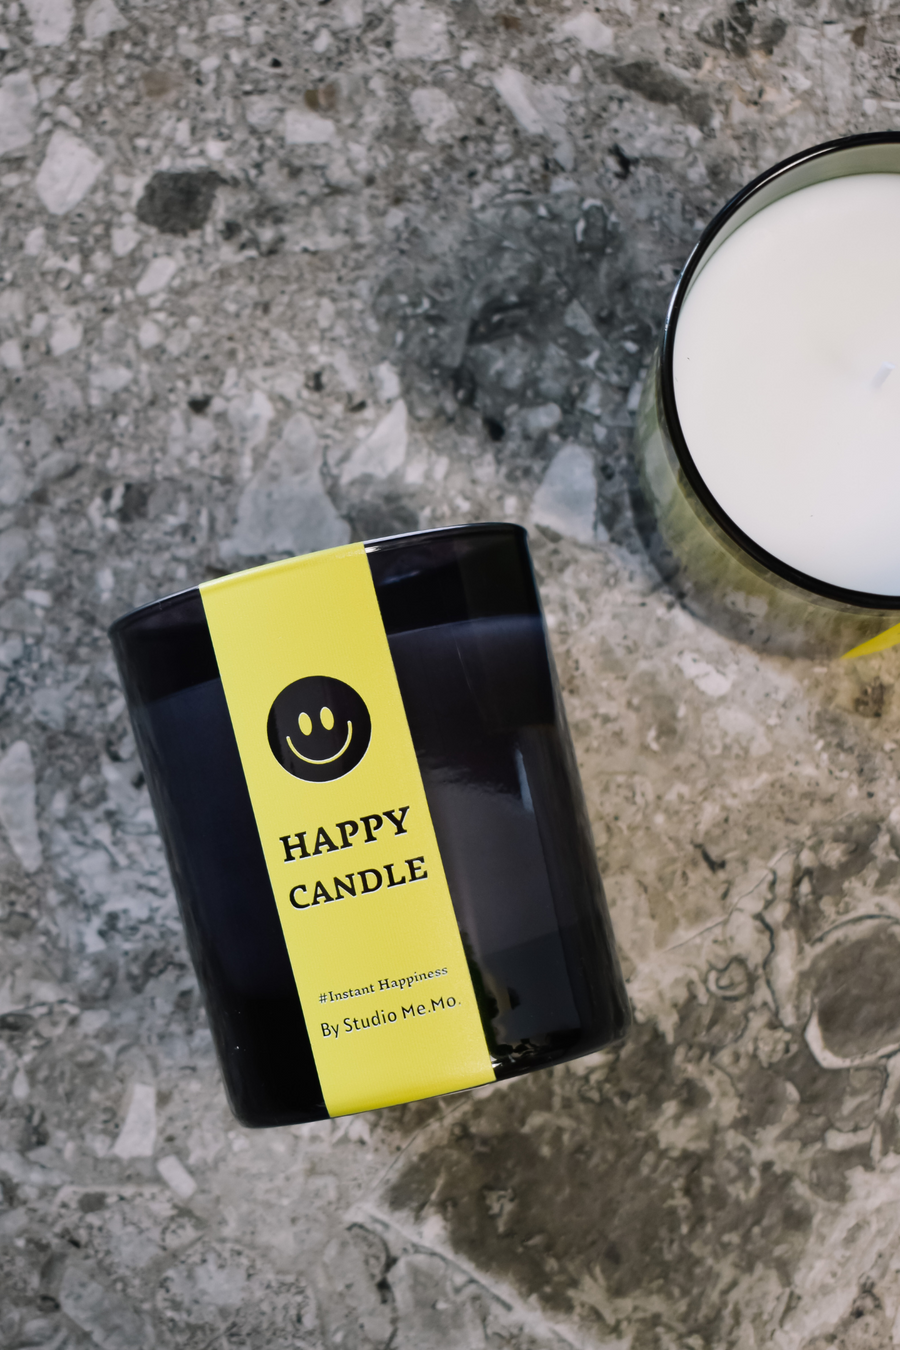 Happy Candle By Studio Me.Mo. Groen